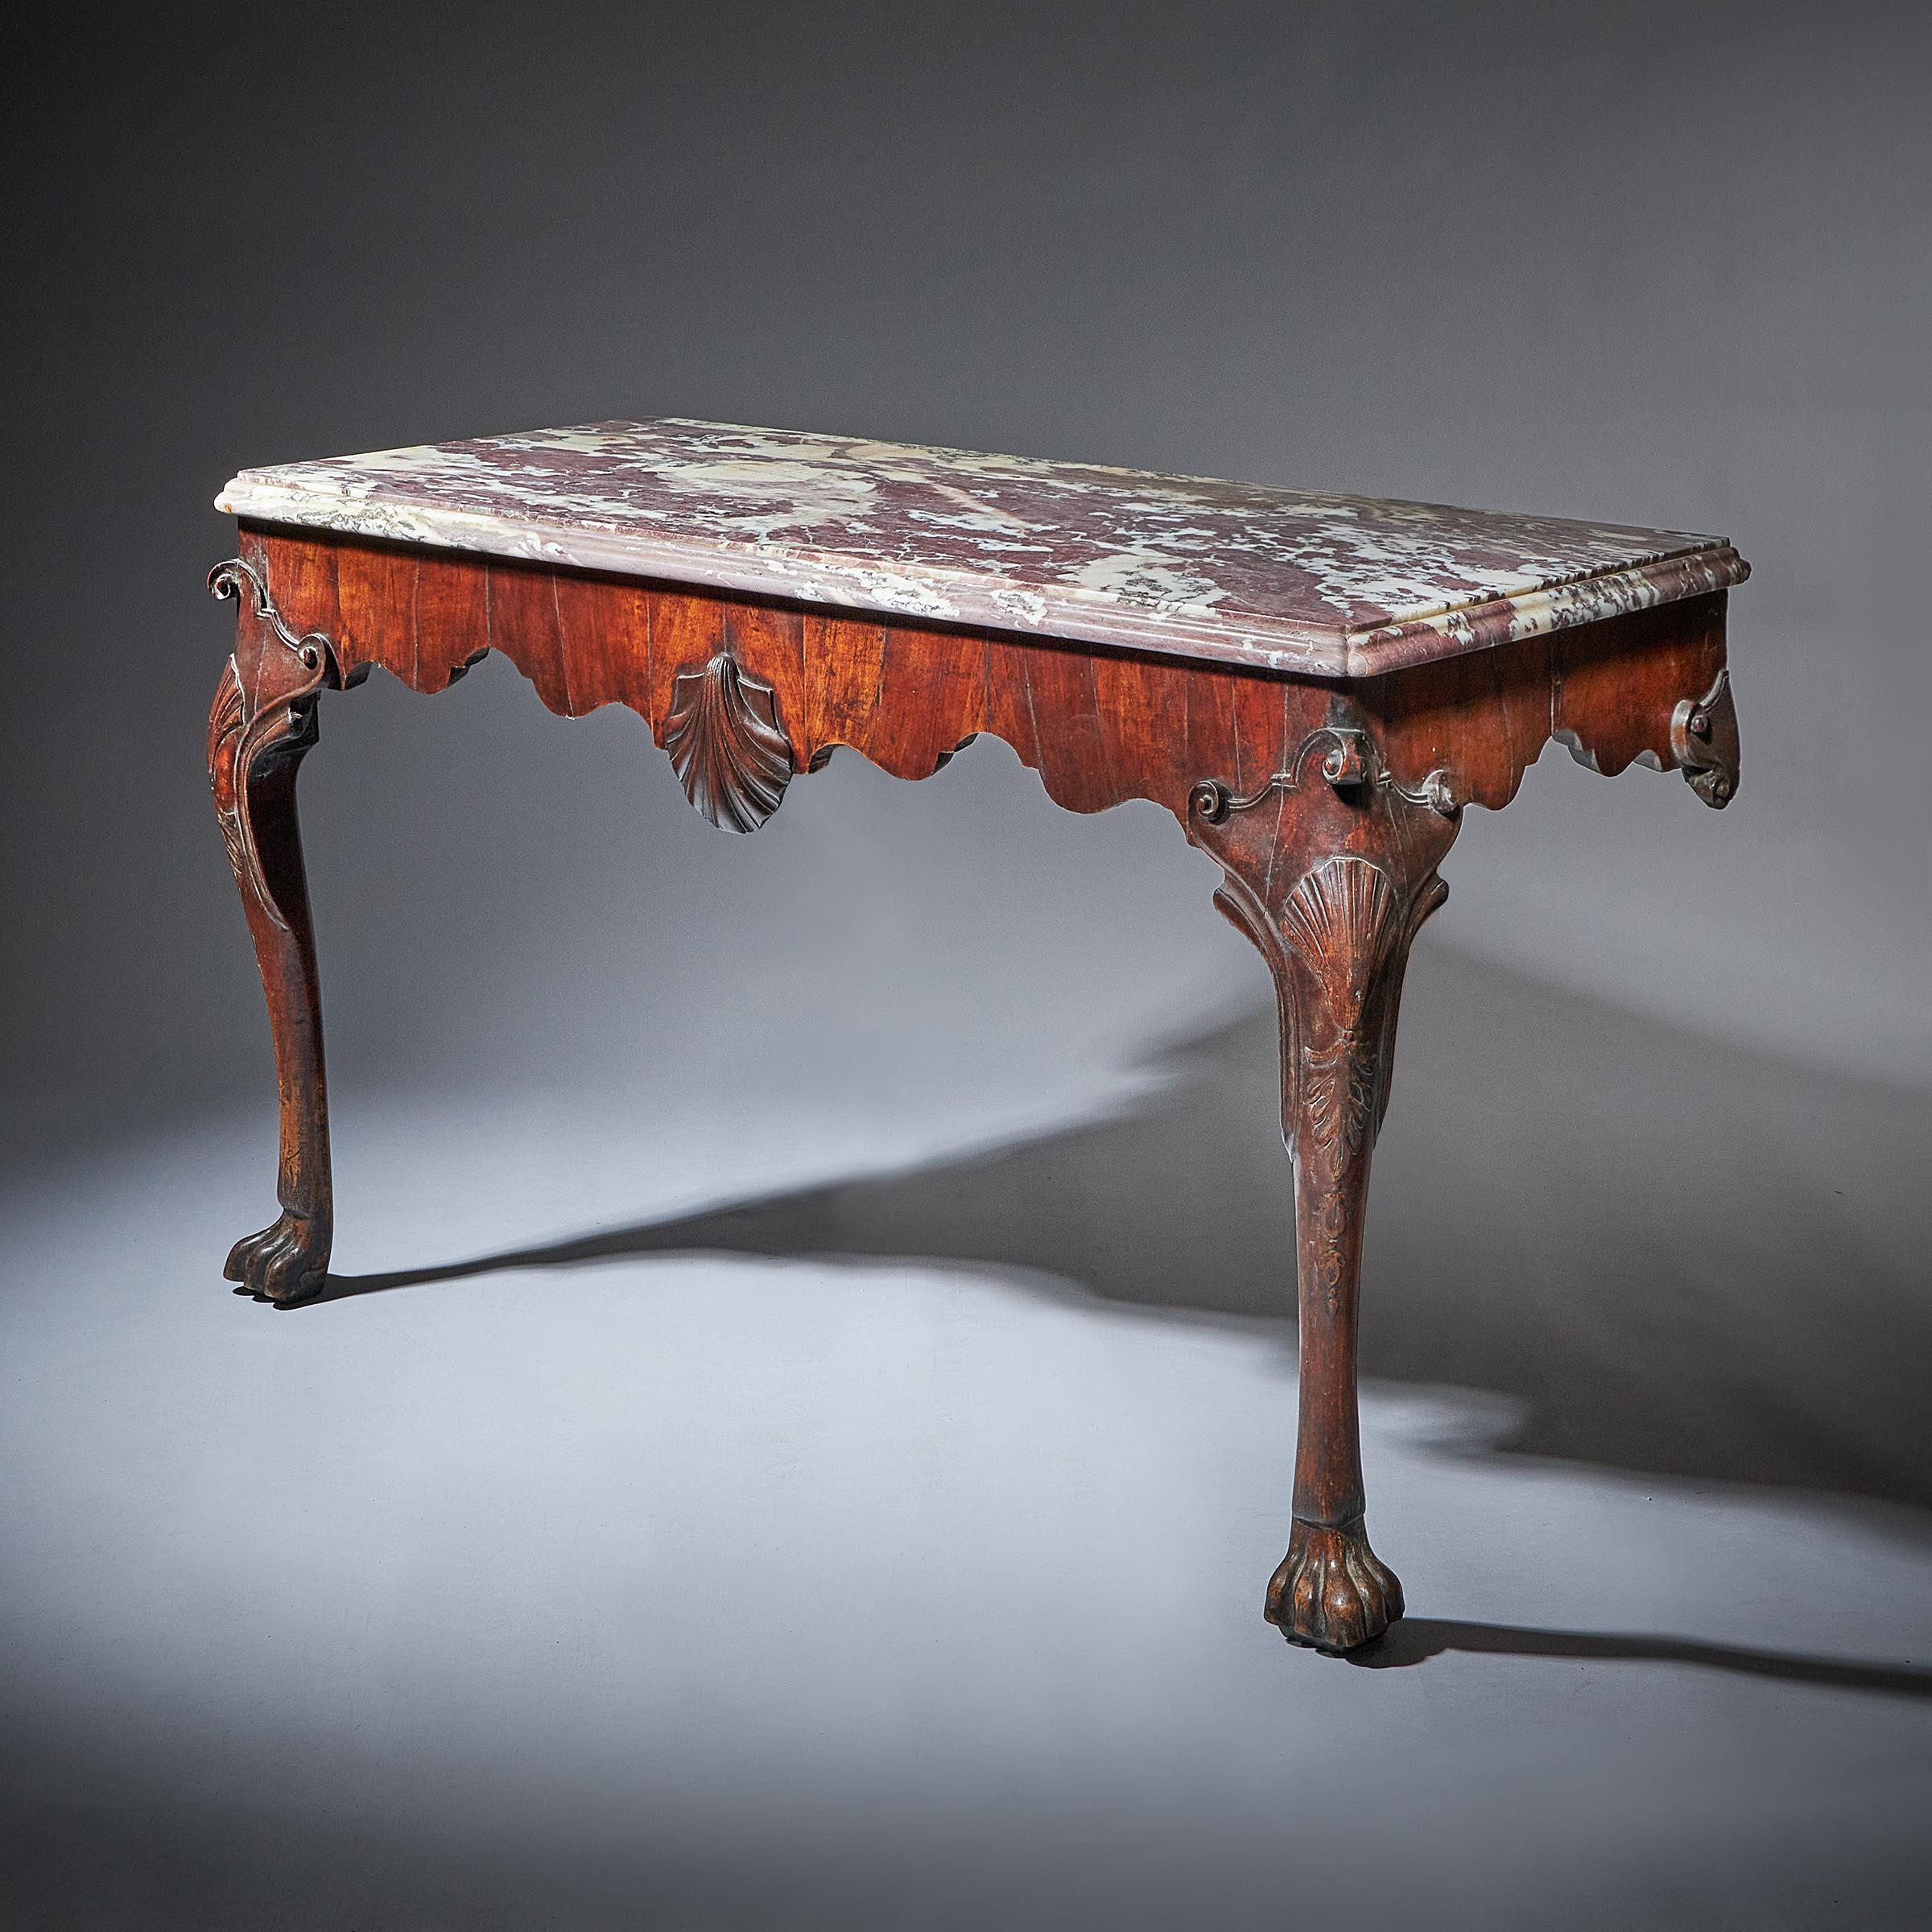 Important Pair of George II Irish Walnut Console Tables, Breccia Violat Marble In Good Condition For Sale In Oxfordshire, United Kingdom